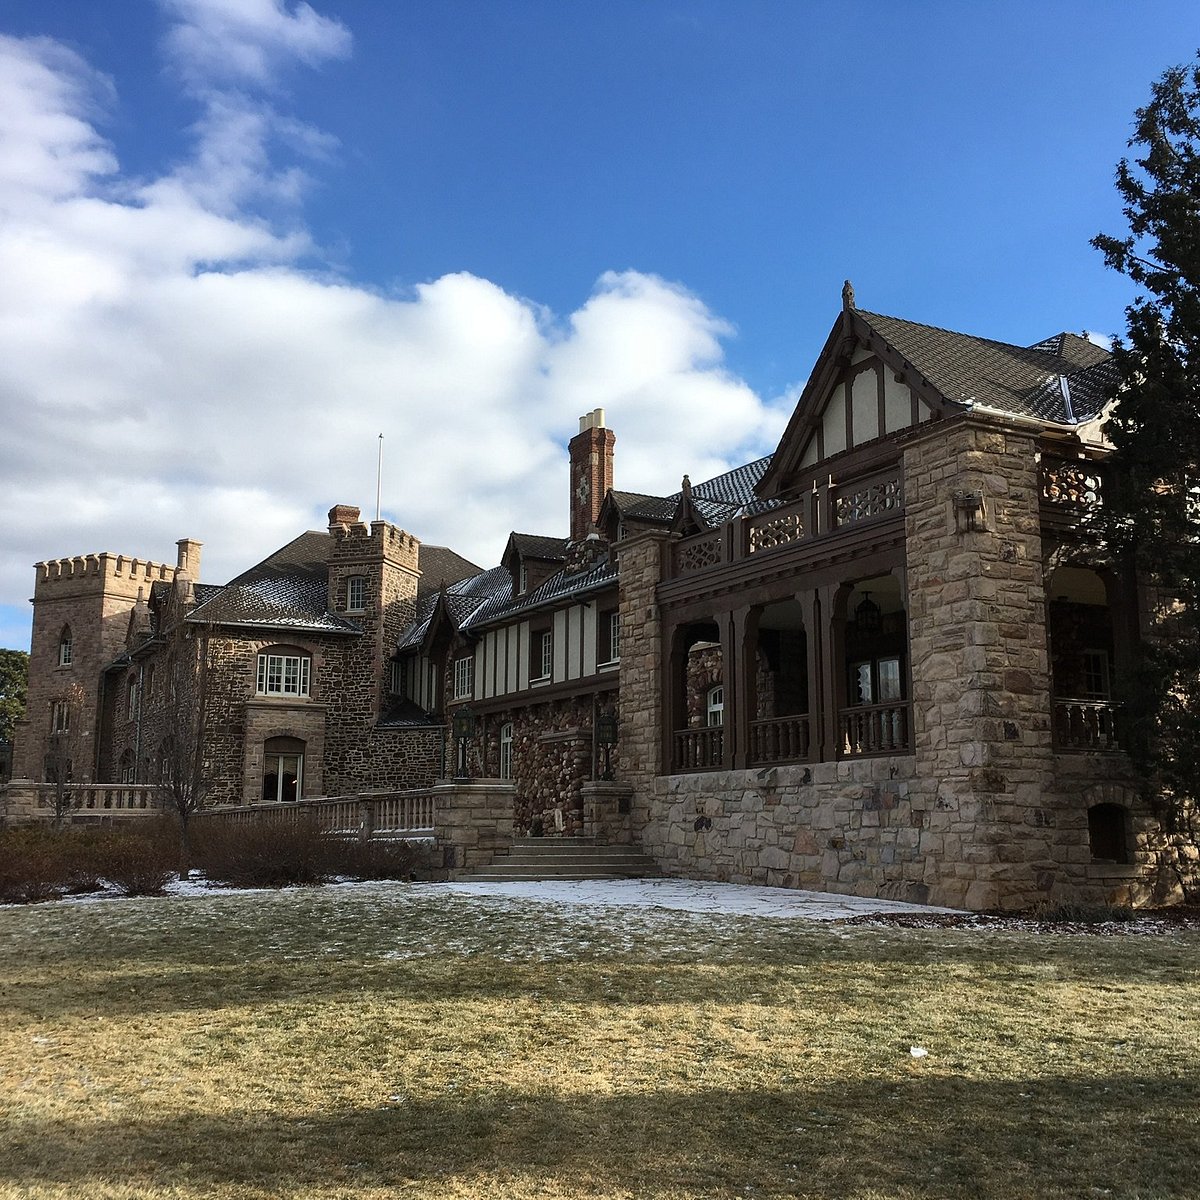 HIGHLANDS RANCH MANSION All You Need to Know BEFORE You Go